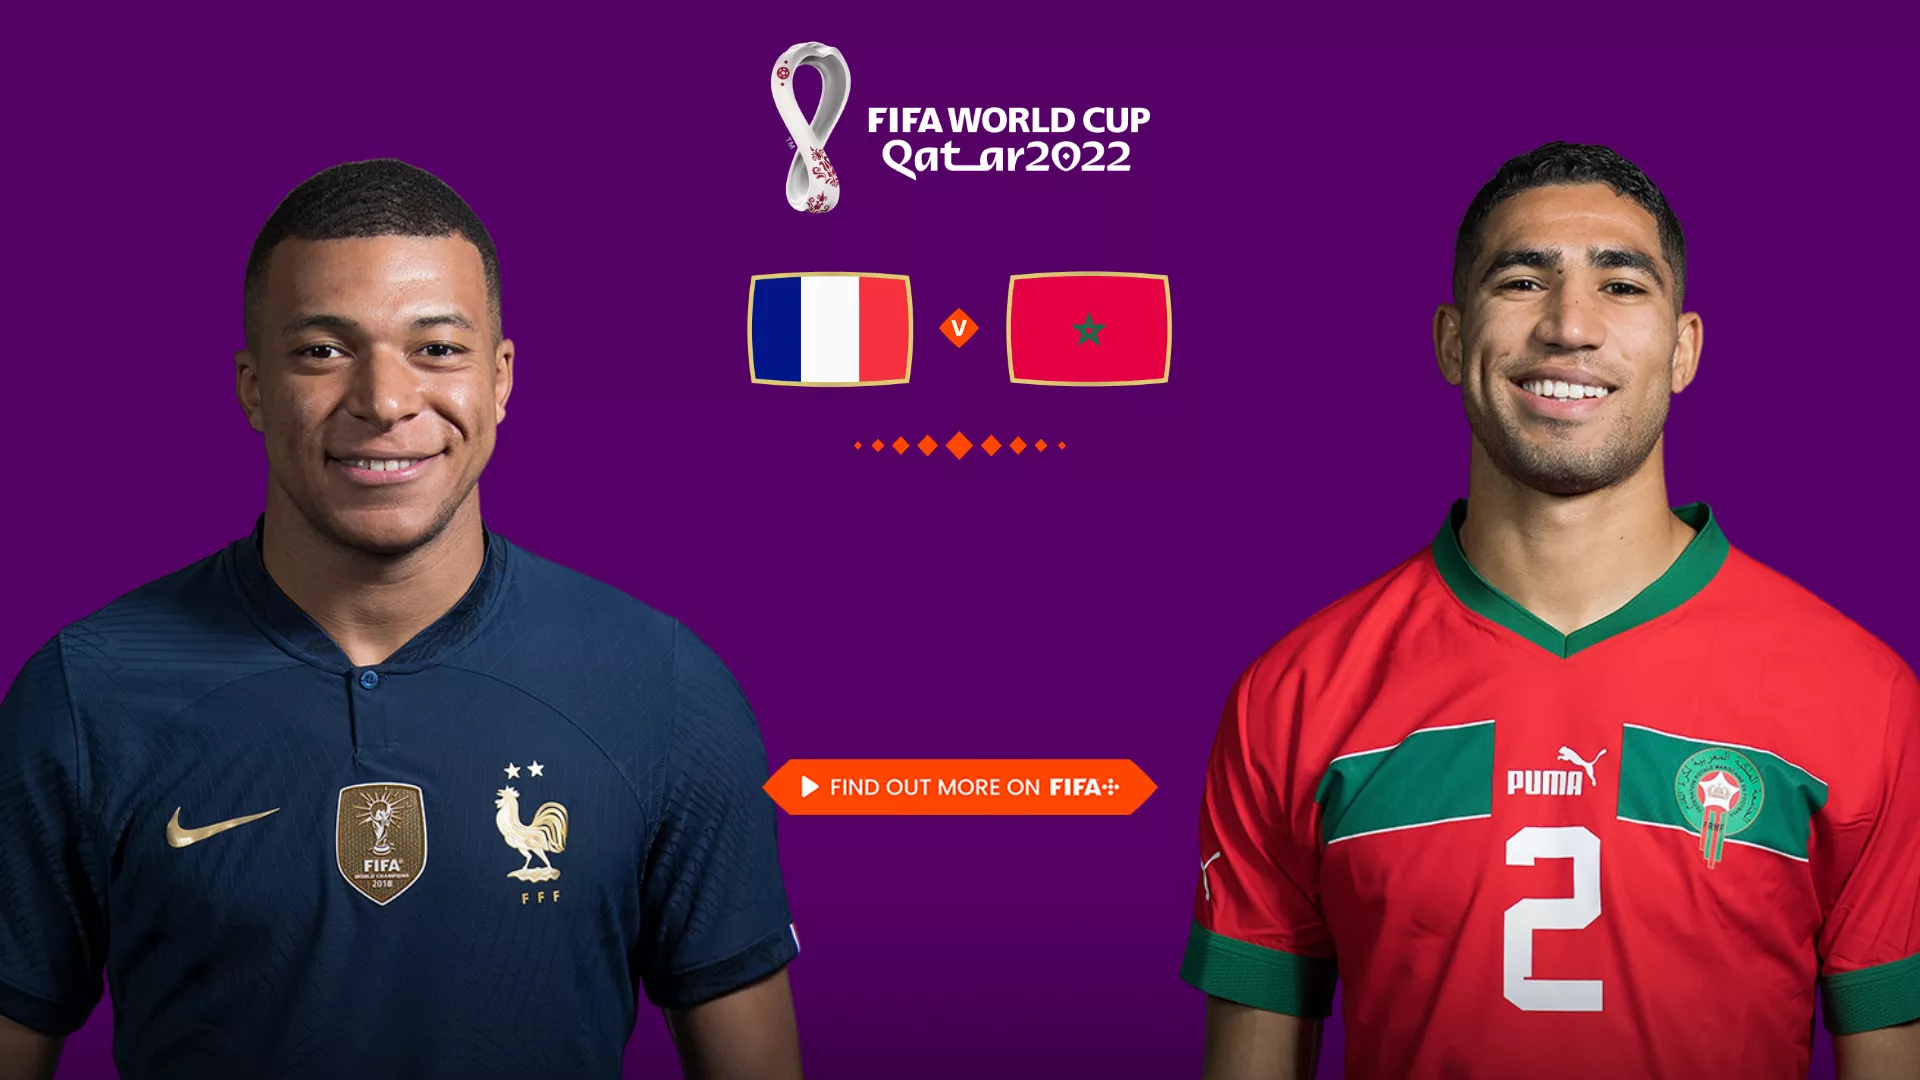 Keys to the World Cup semi-final between France and Morocco